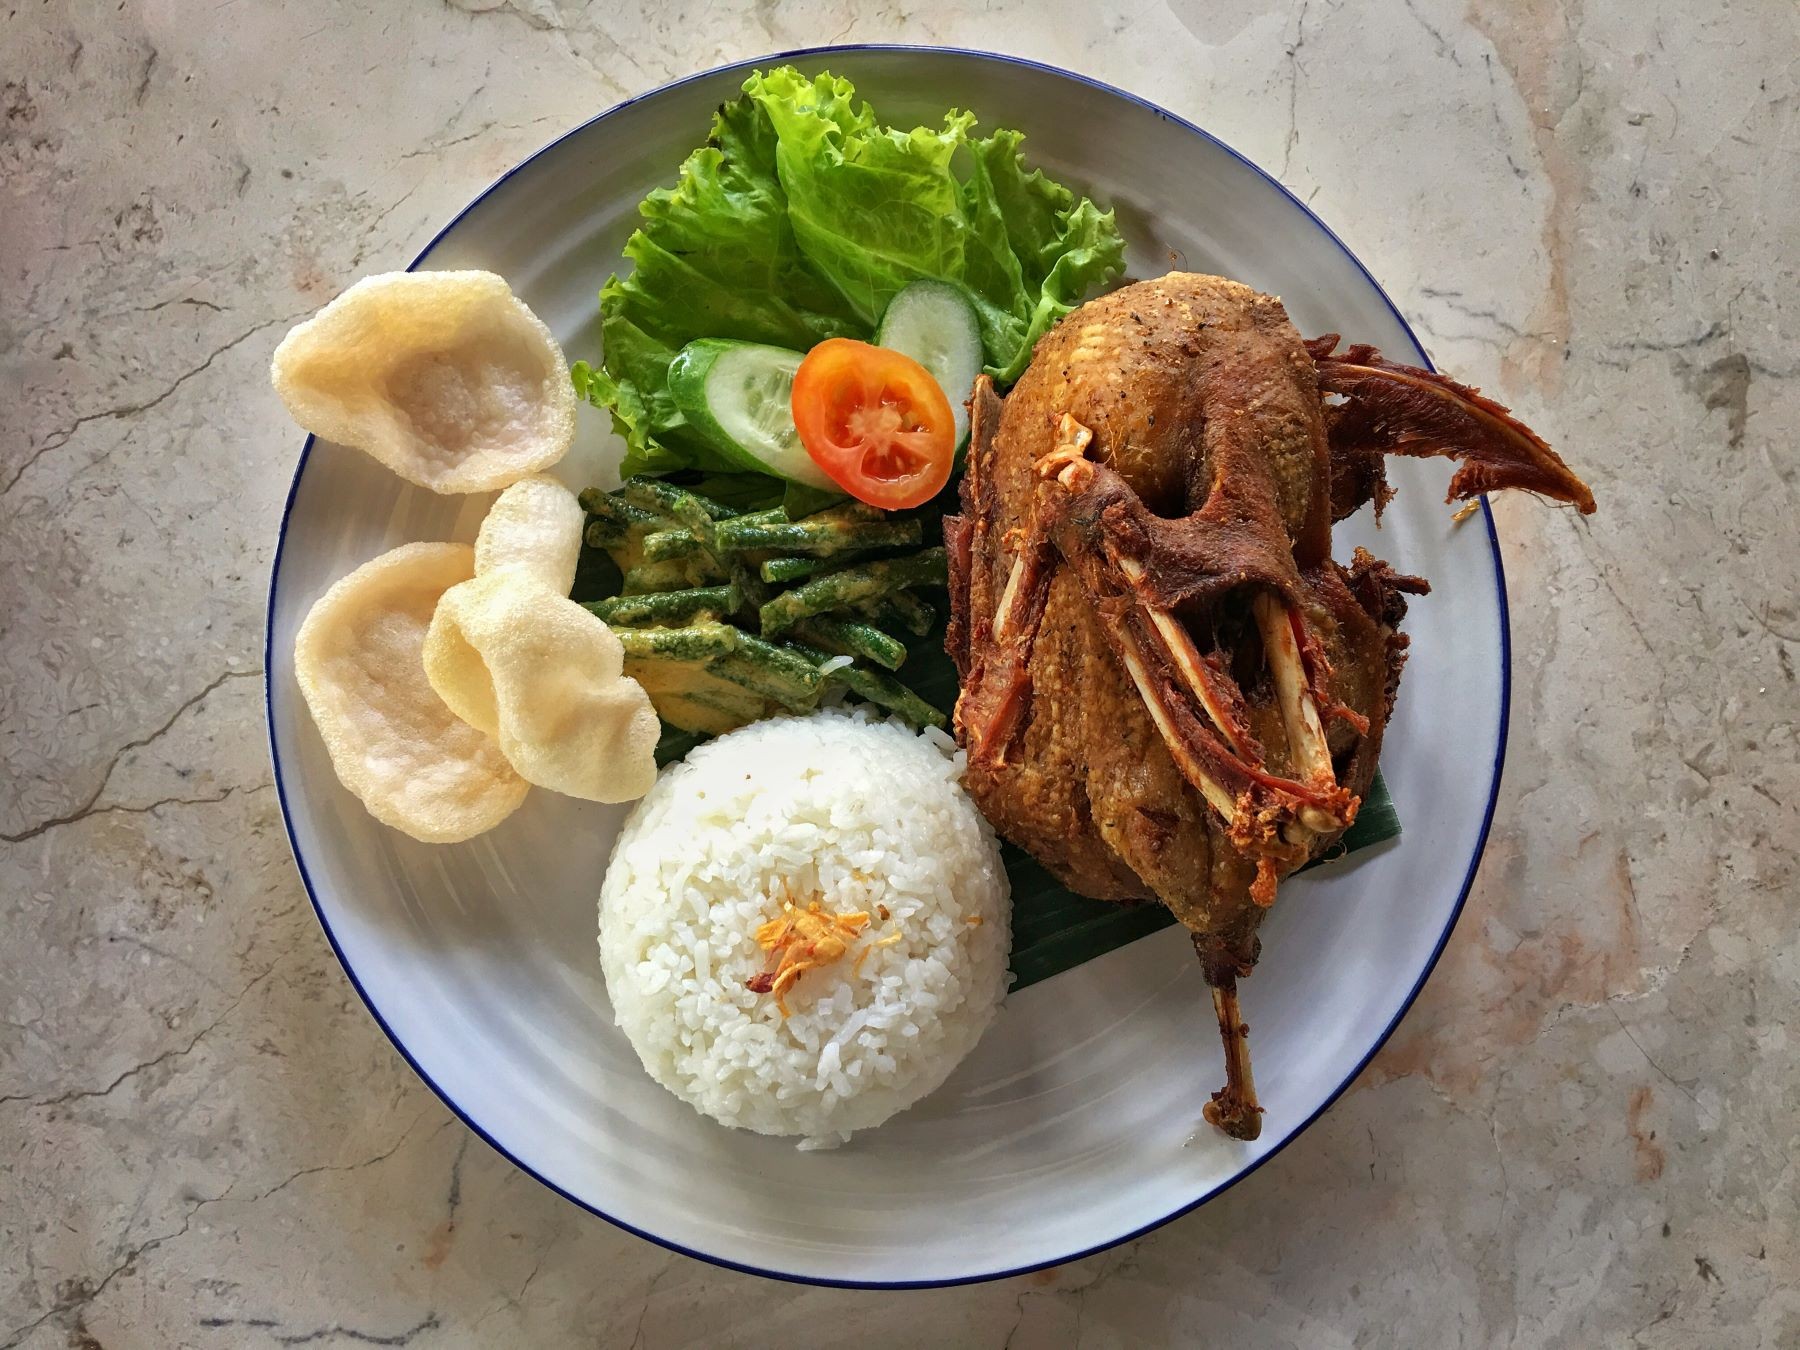 Visitbali - 5 Popular And Affordable Lunch Places In Bali